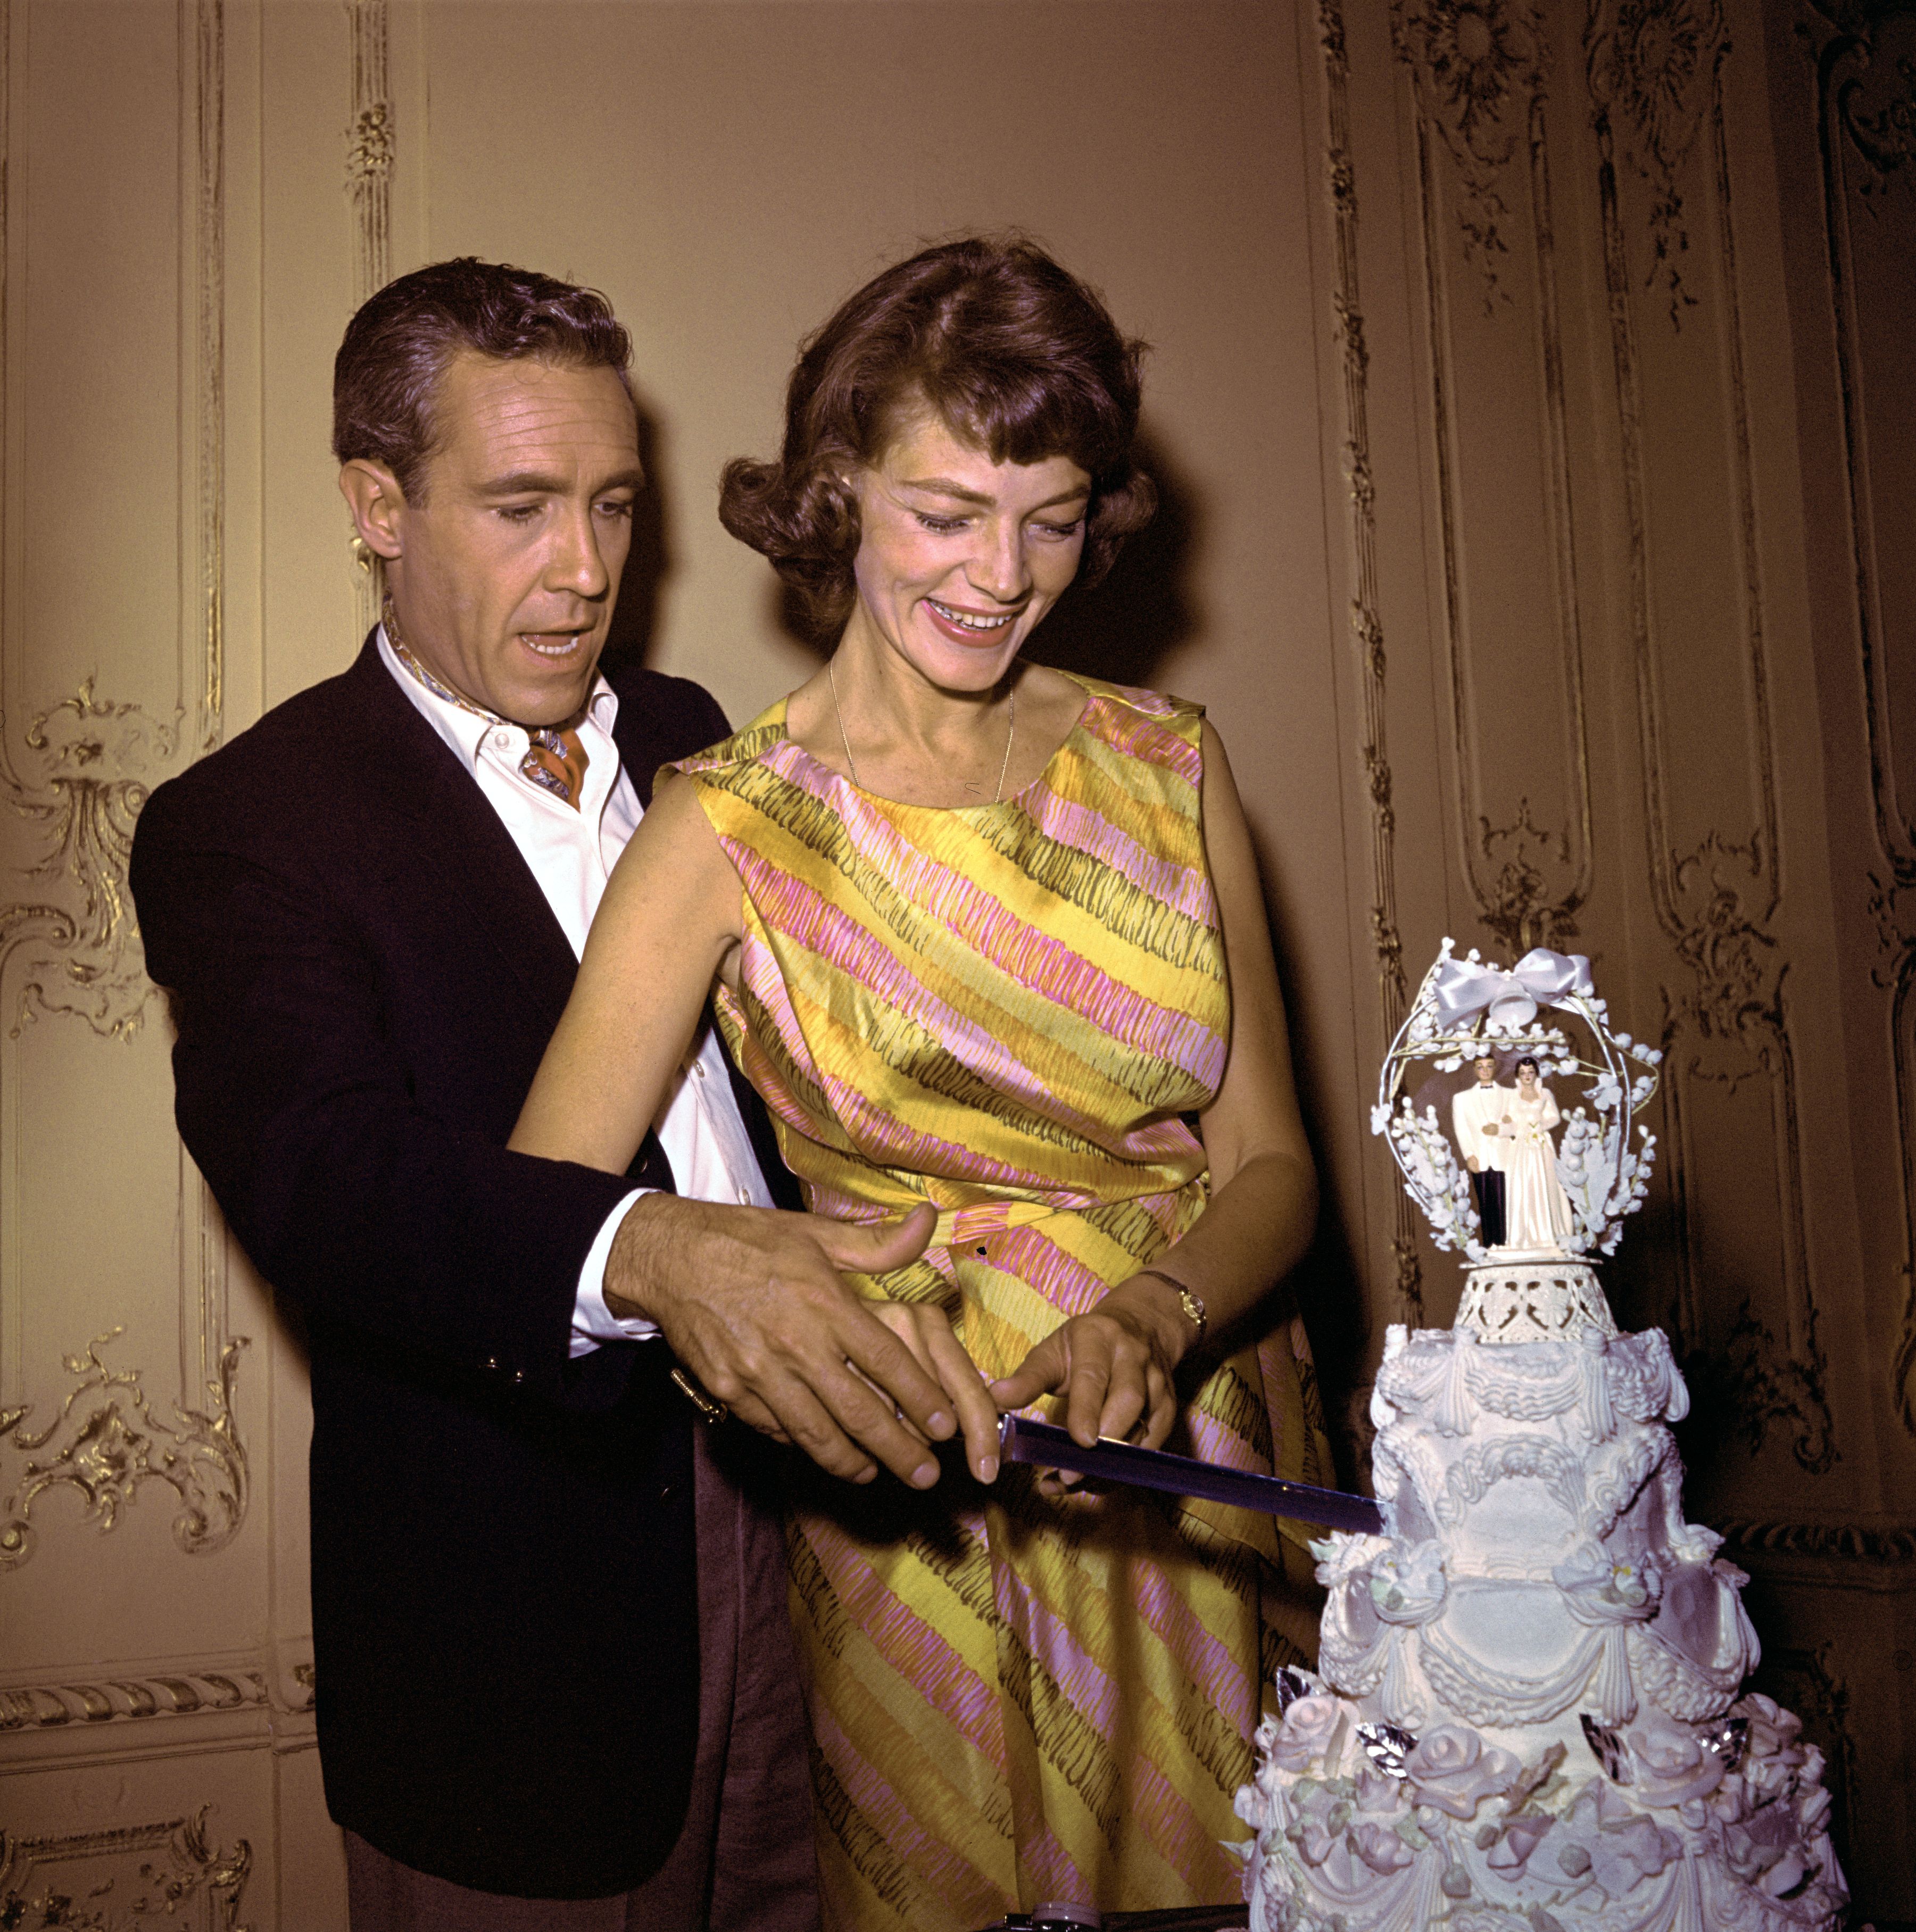 Jason Robards and Lauren Bacall cutting their wedding cake on July 5, 1961. | Source: Bettmann/Getty Images